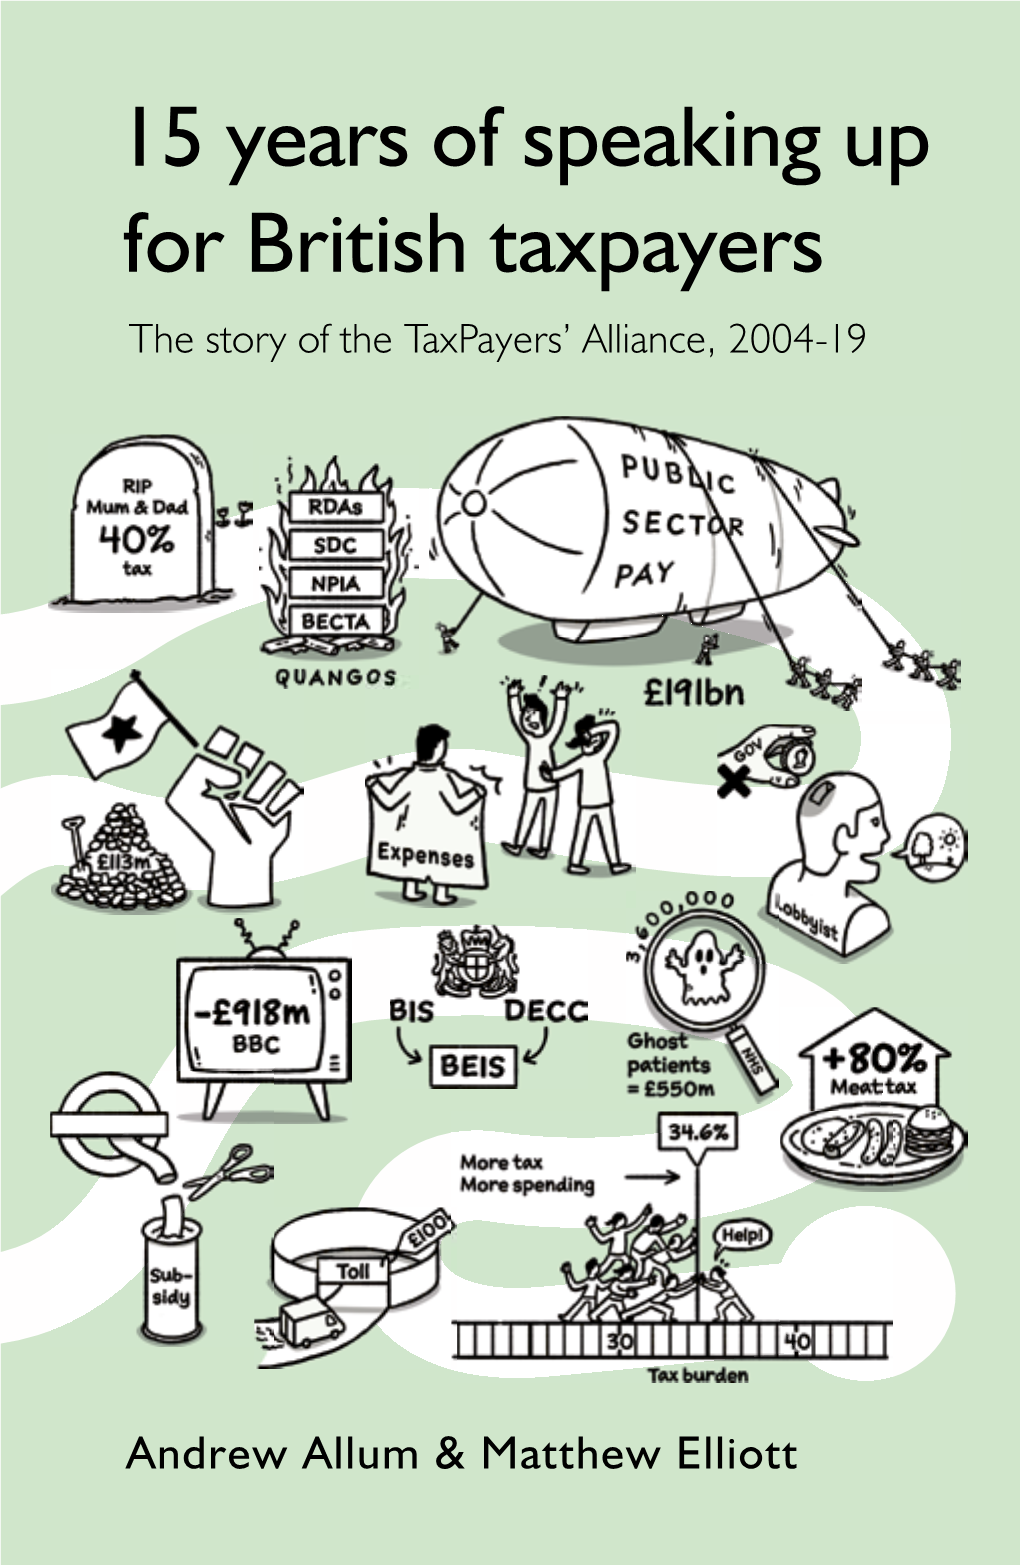 15 Years of Speaking up for British Taxpayers the Story of the Taxpayers’ Alliance, 2004-19